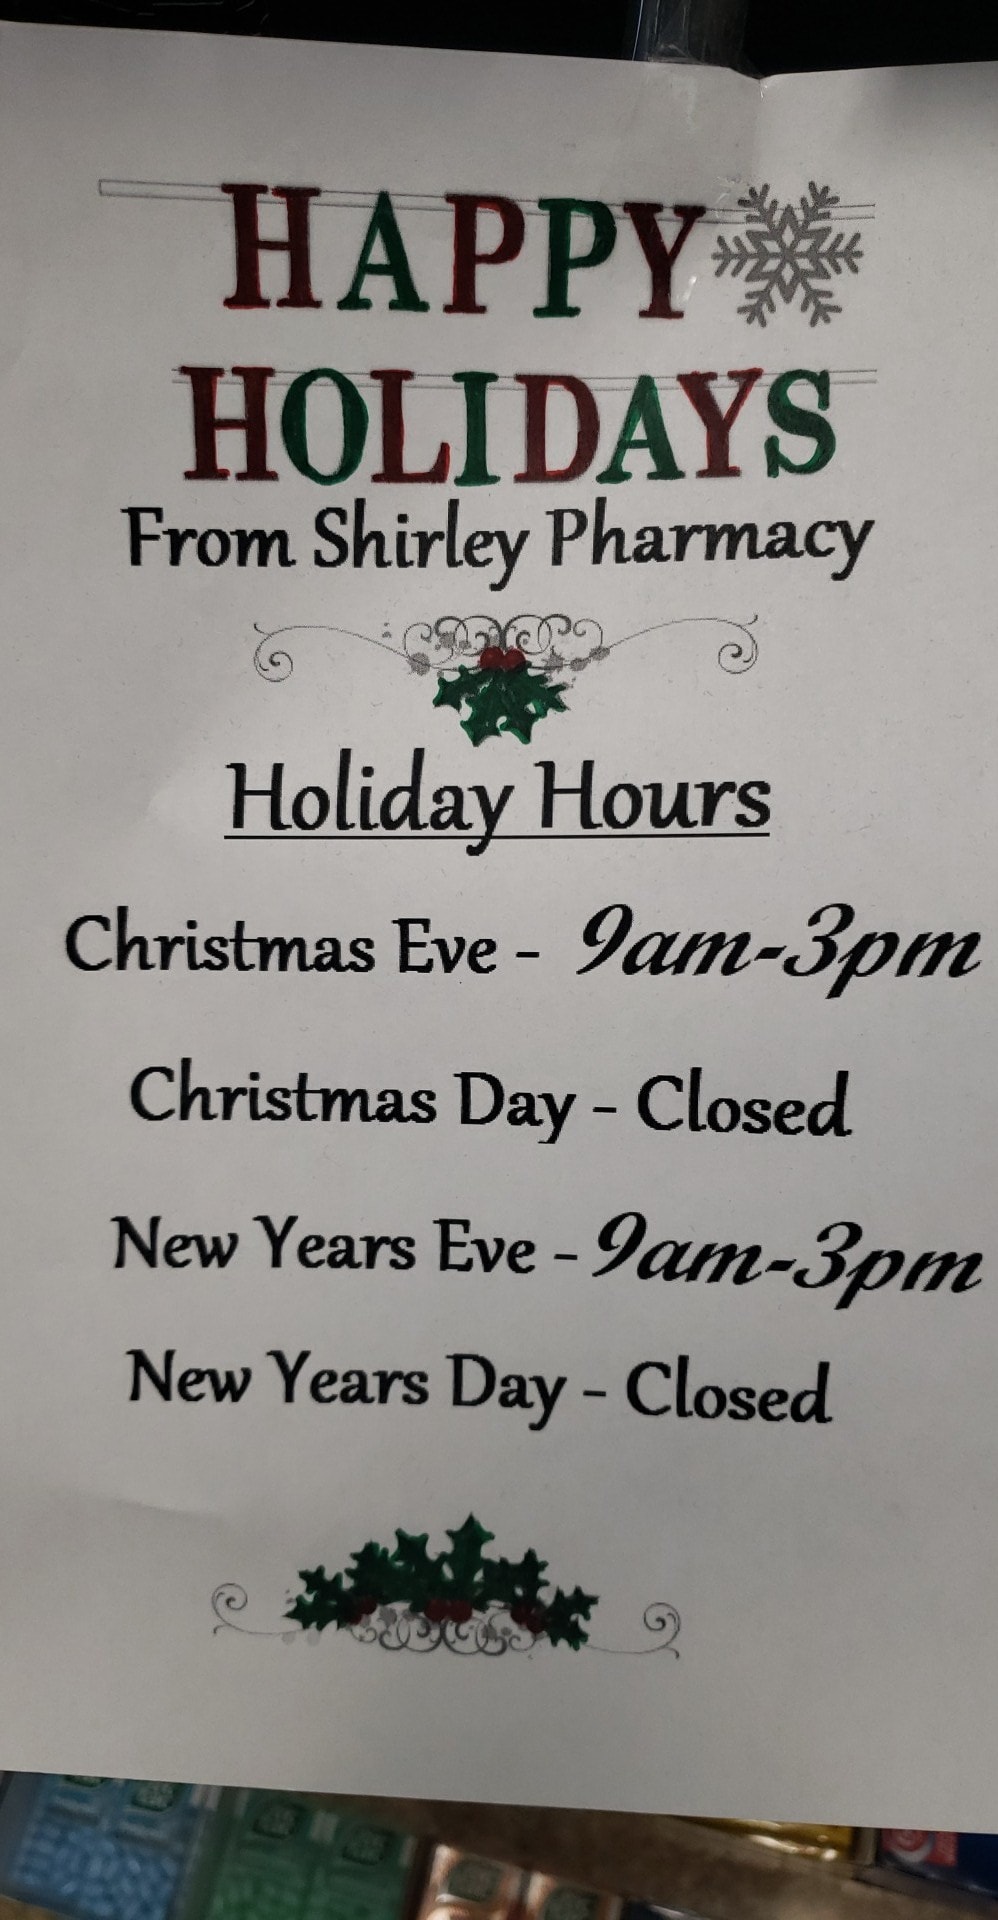 Shirley Pharmacy and Surgicals